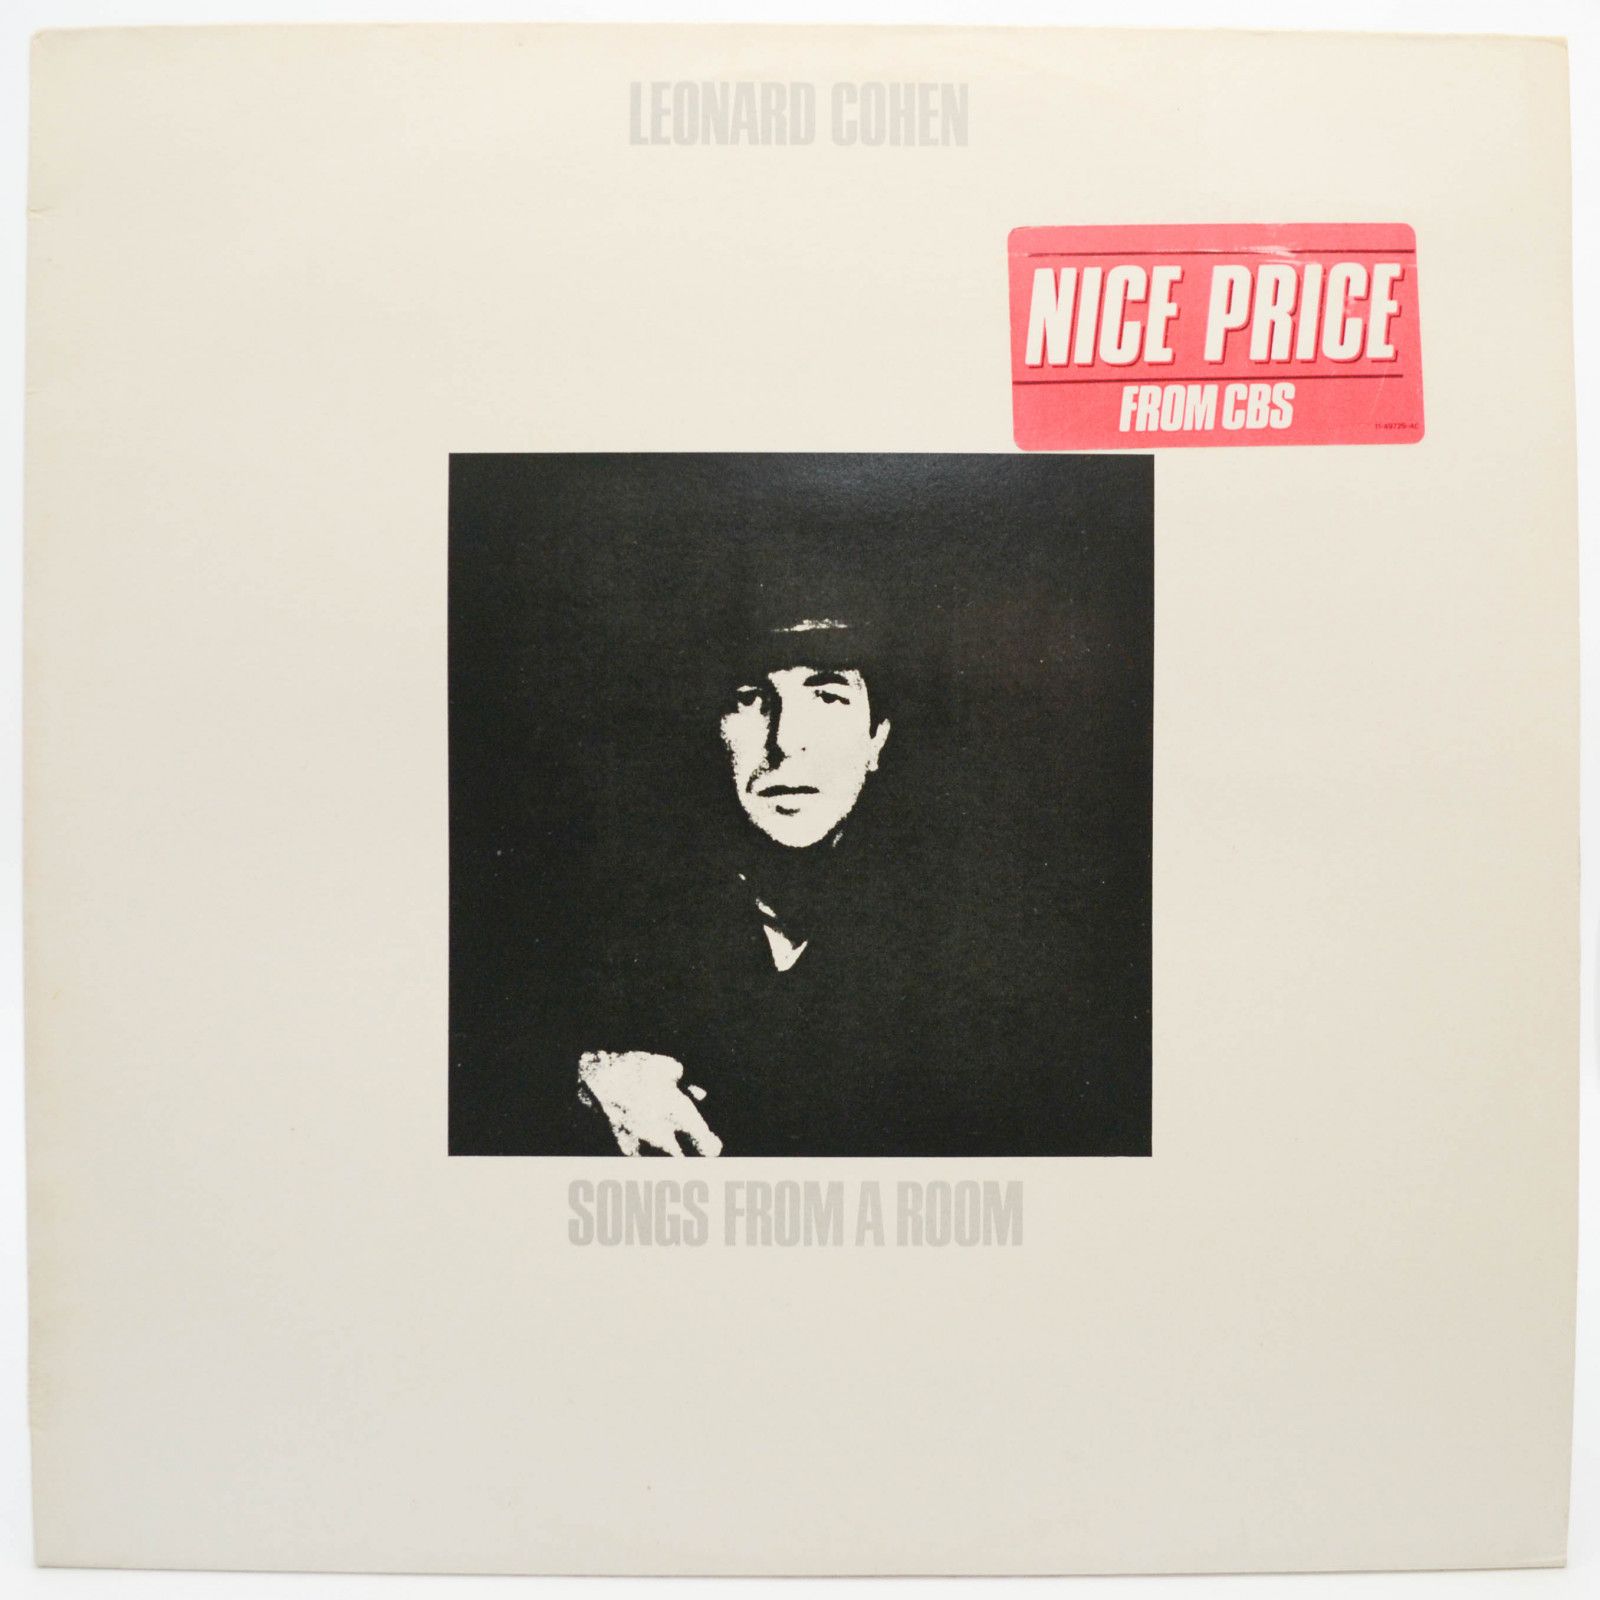 Leonard Cohen — Songs From A Room, 1969